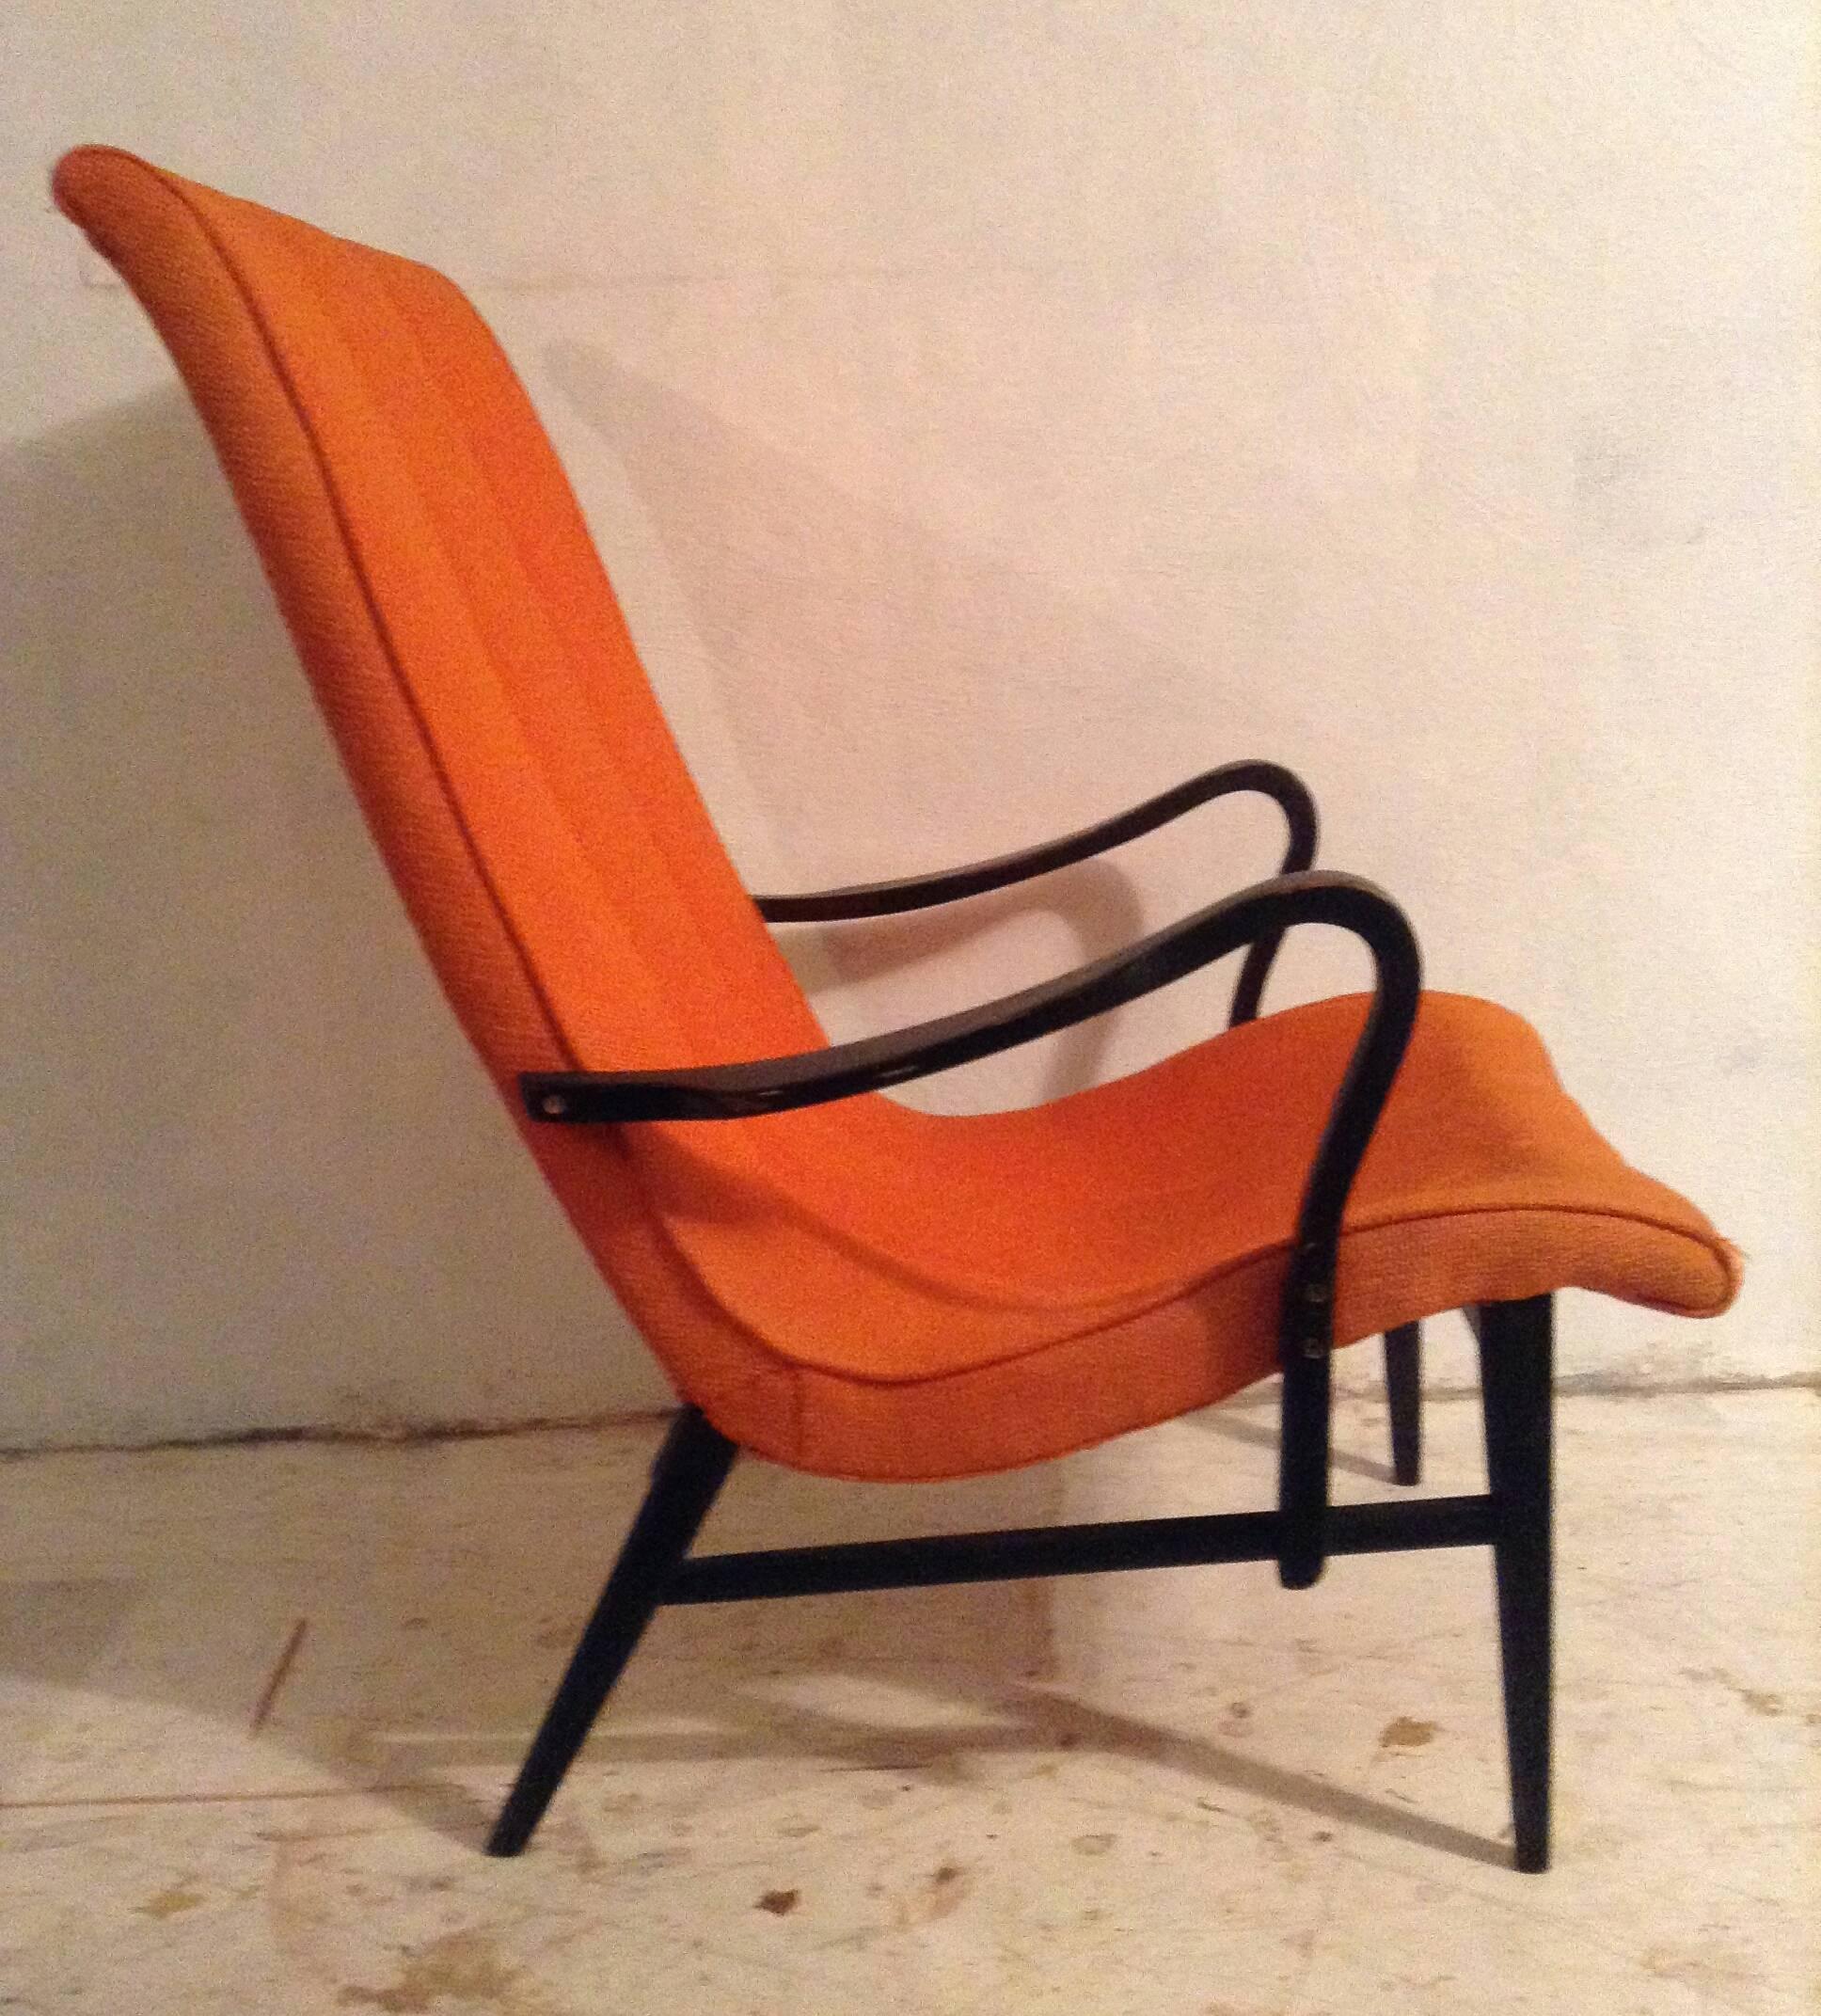 Japanese Modernist High Back Lounge Chair, Made in Japan, Manner of Bruno Mathsson